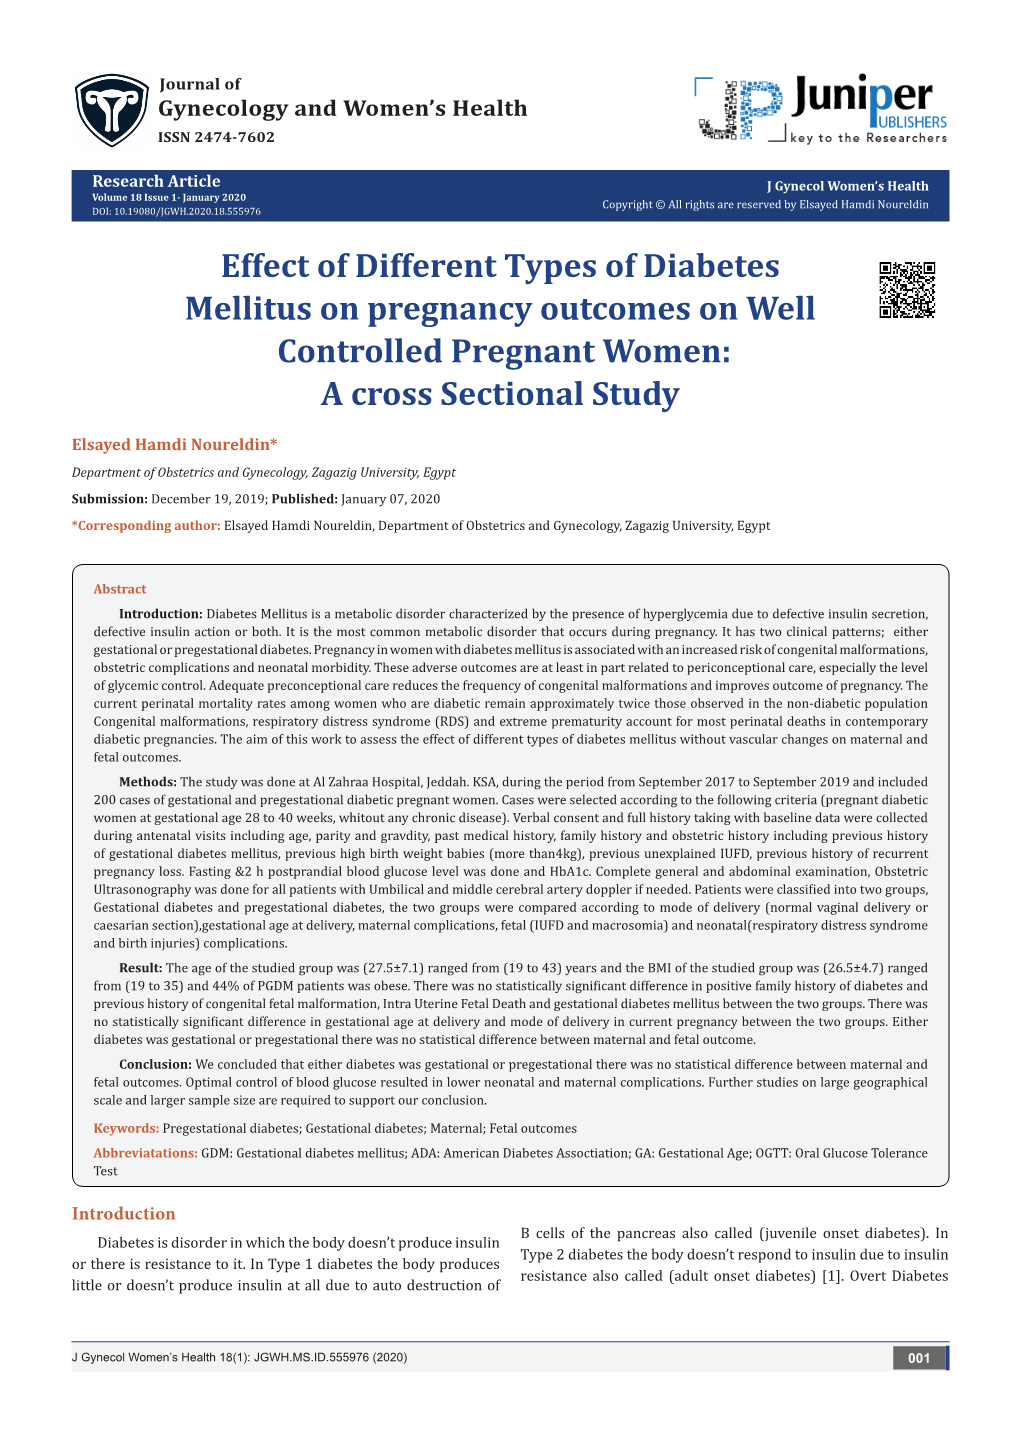 Effect of Different Types of Diabetes Mellitus on Pregnant Outcomes on Well Controlled Pregnant 002 Women: Across Sectional Study